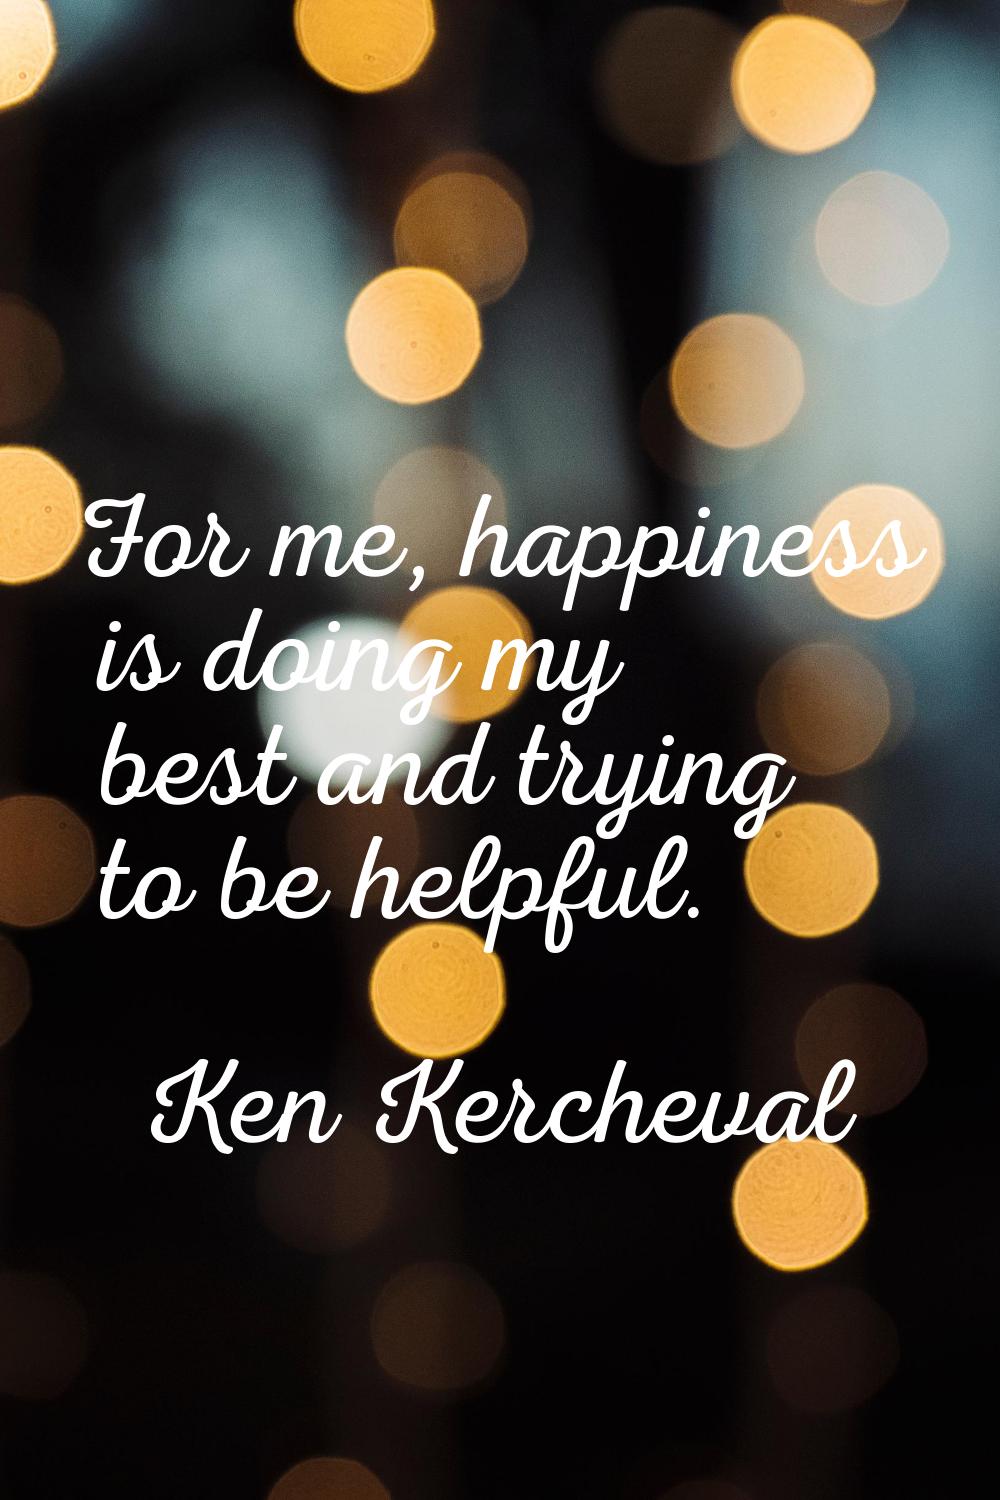 For me, happiness is doing my best and trying to be helpful.